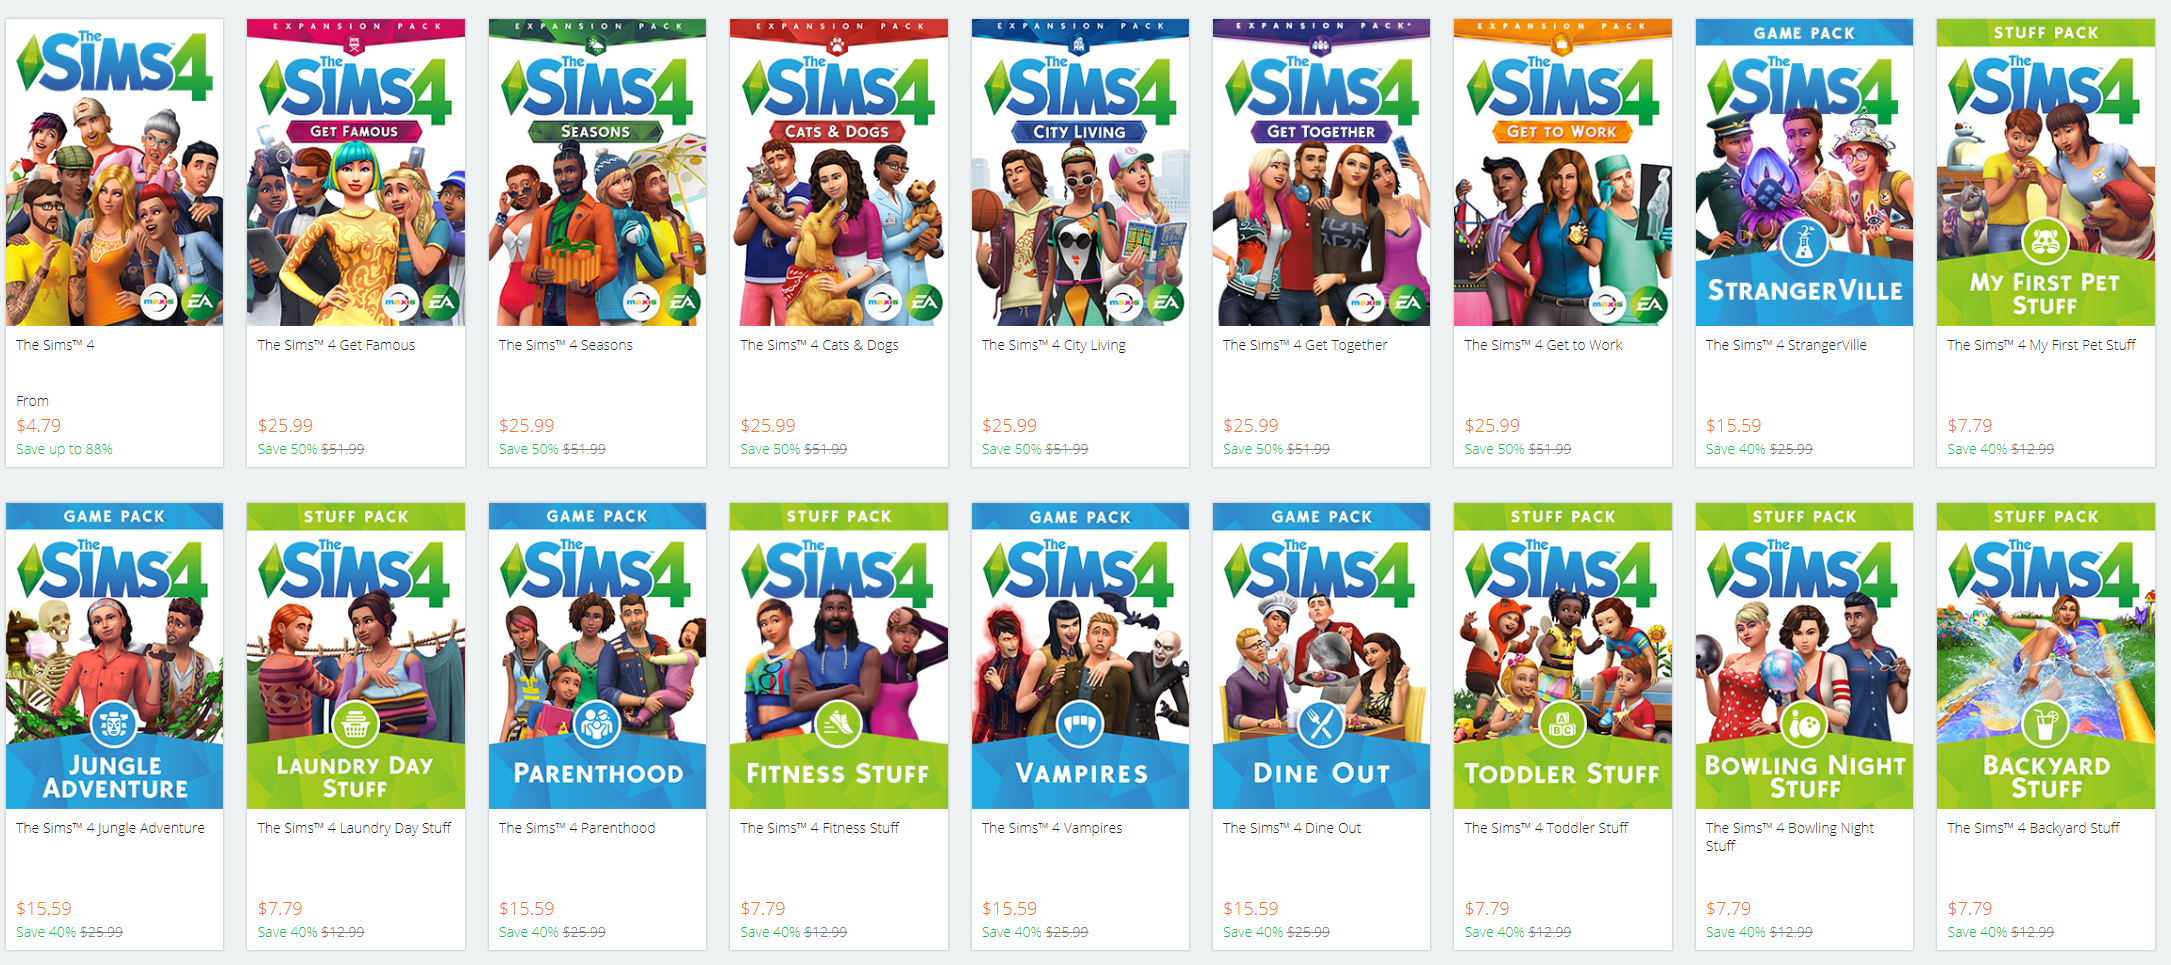 The Sims 4 DLCs